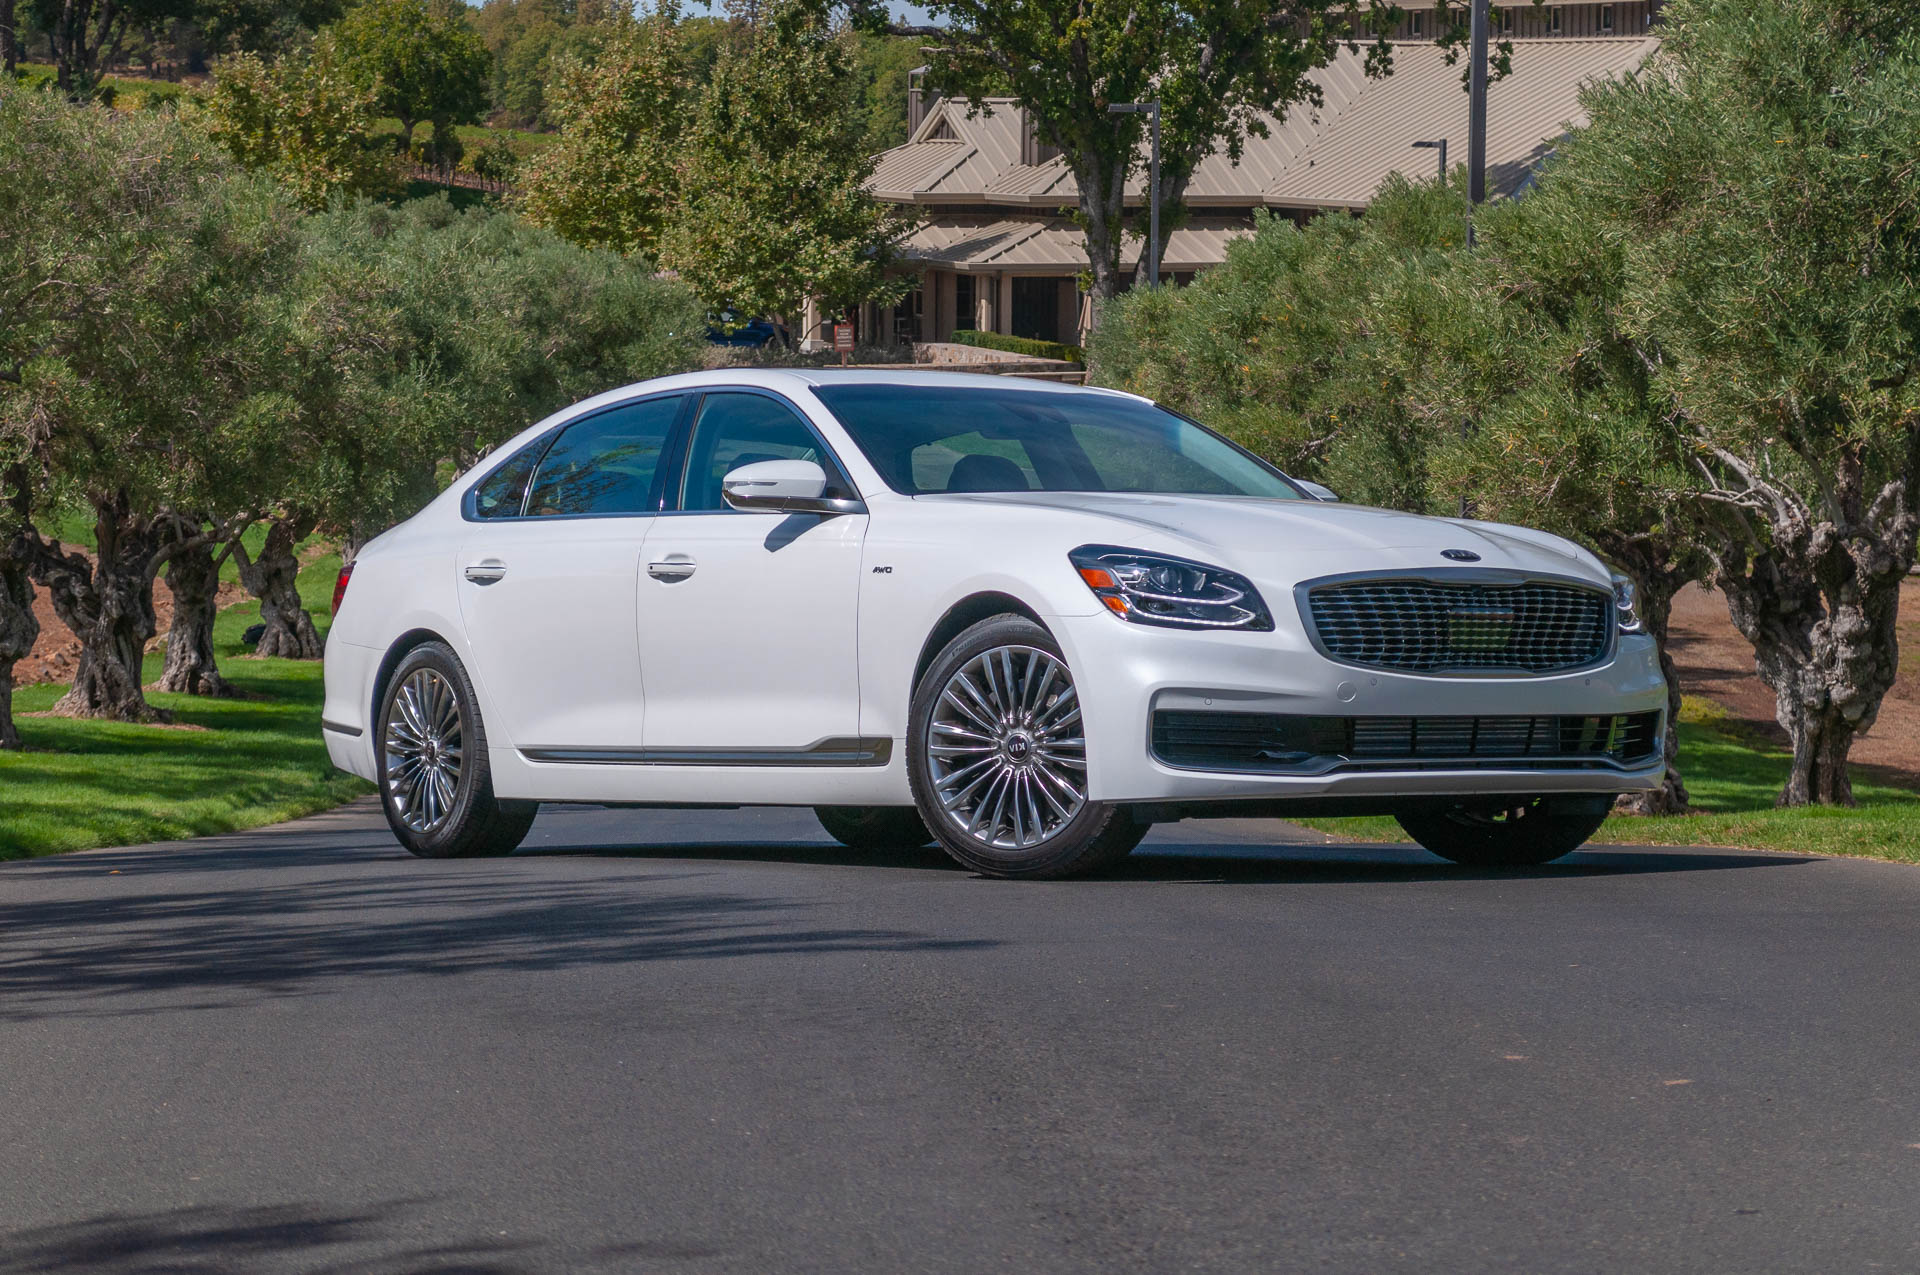 2019 Kia K900 first drive review: Tighter and more European